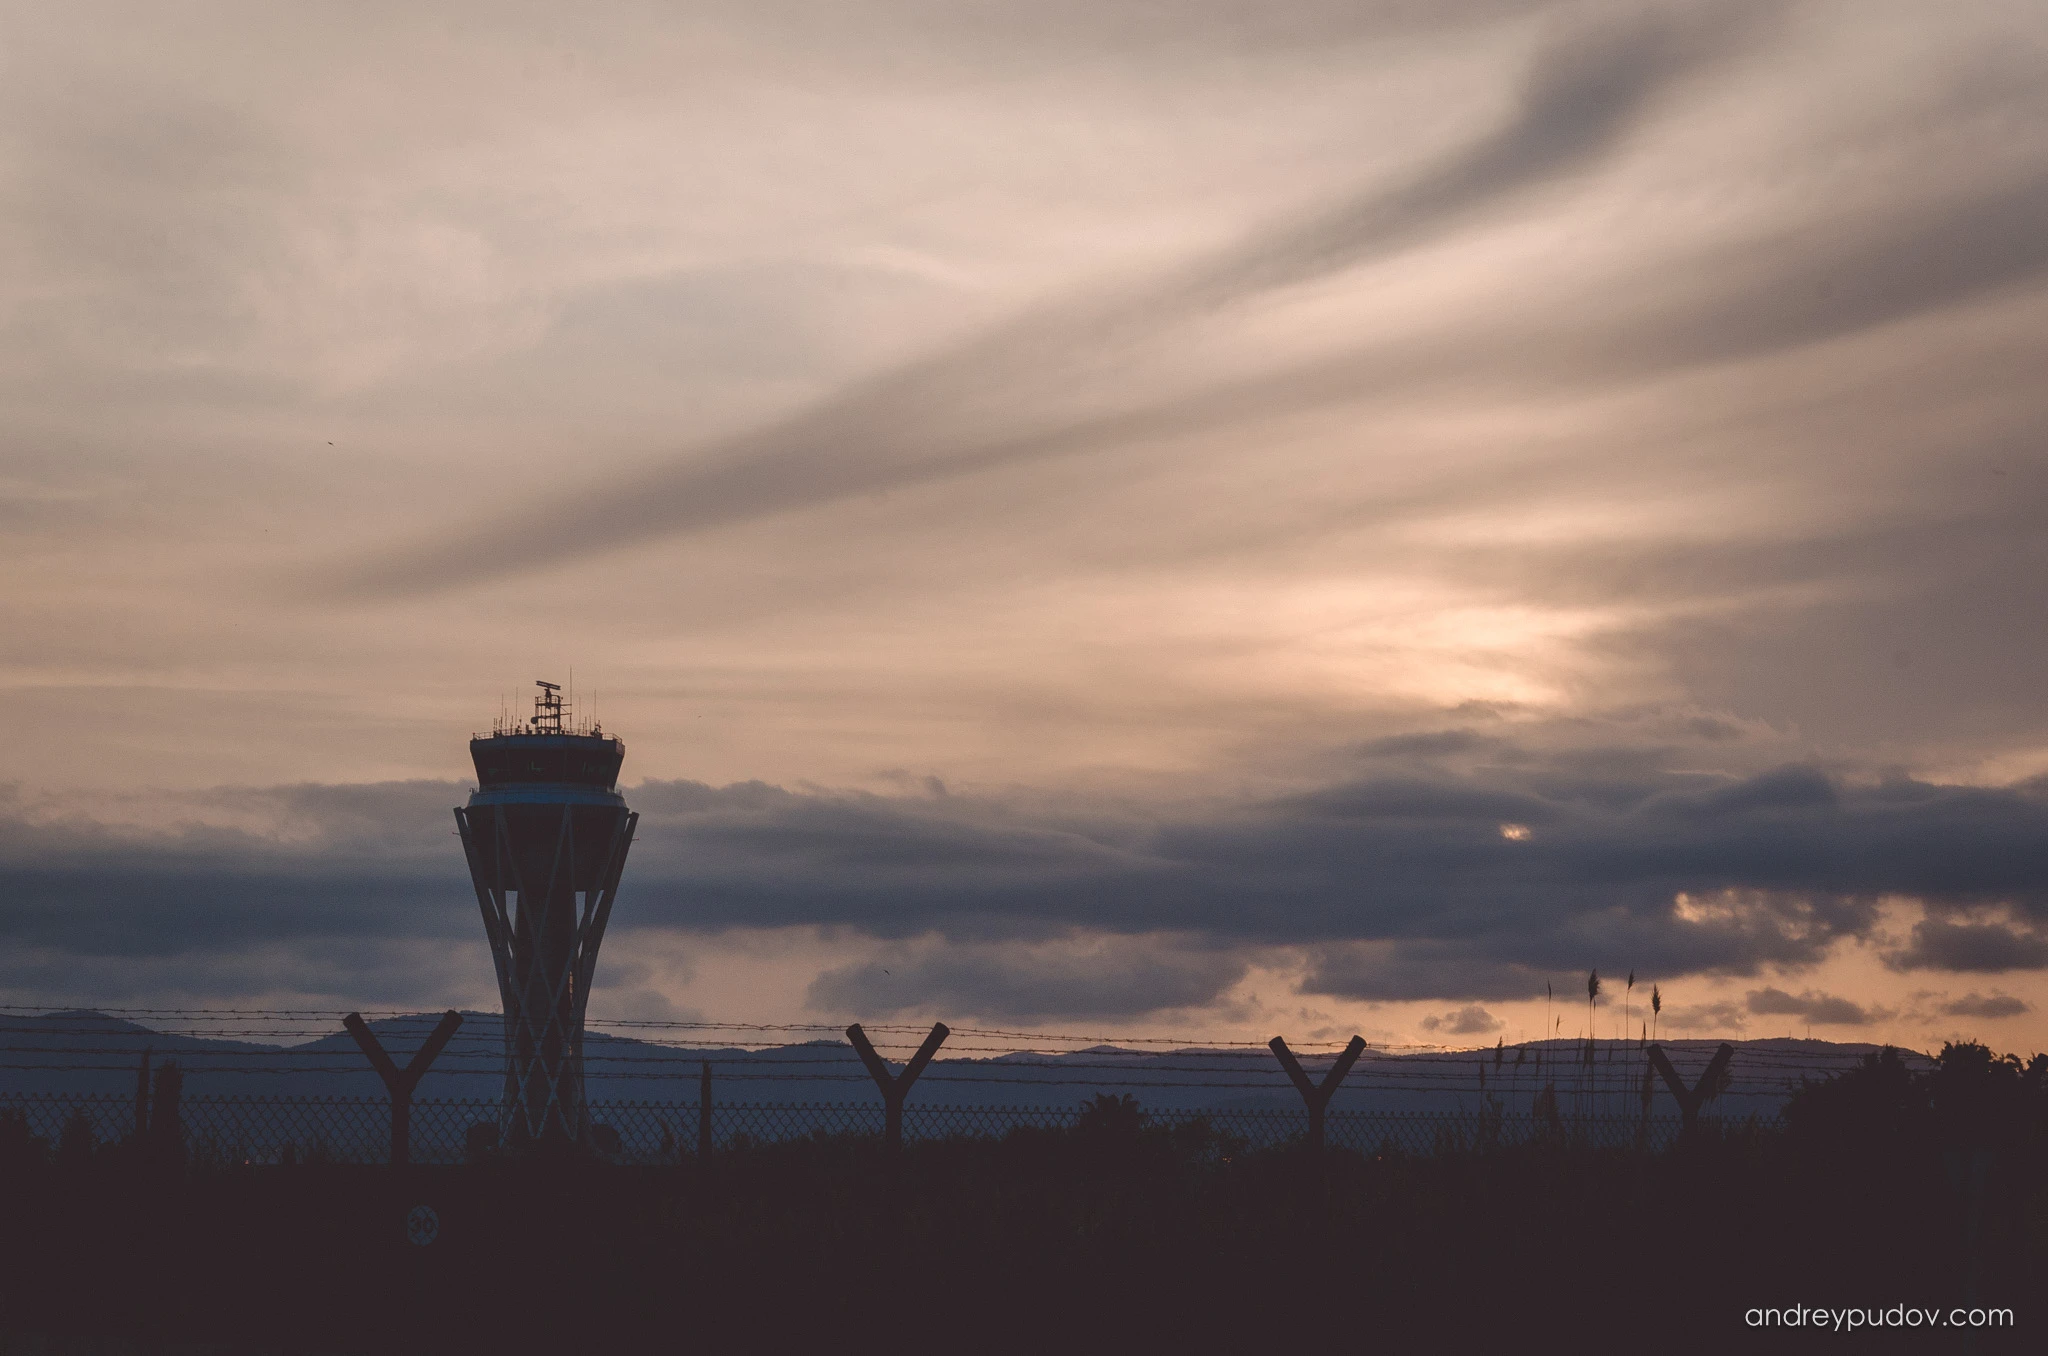 LEBL Barcelona El Prat International Airport - The new control tower is a hyperboloid structure